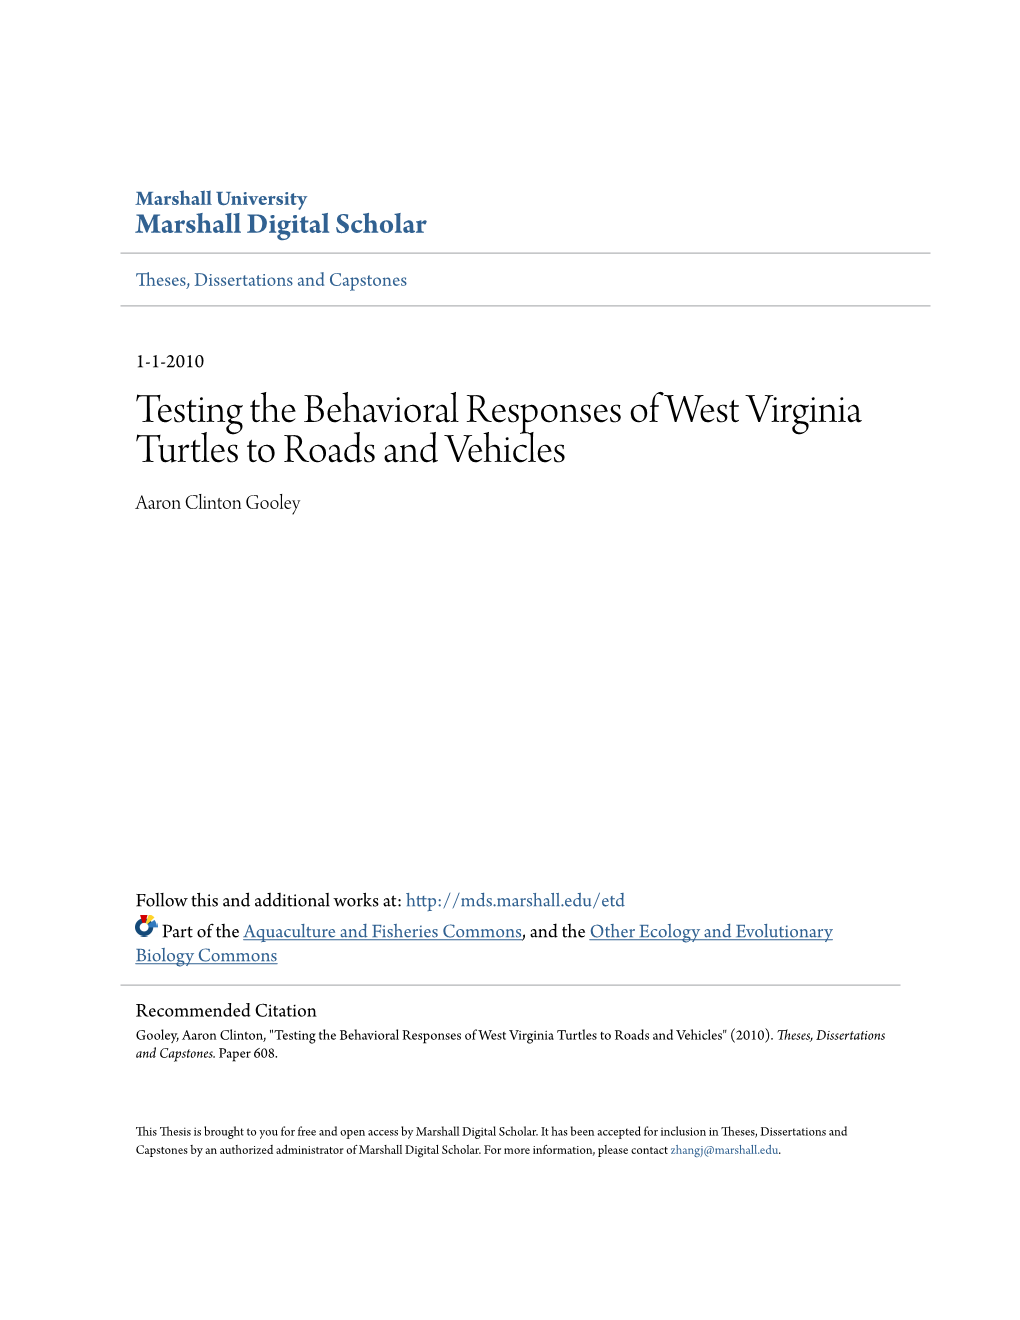 Testing the Behavioral Responses of West Virginia Turtles to Roads and Vehicles Aaron Clinton Gooley